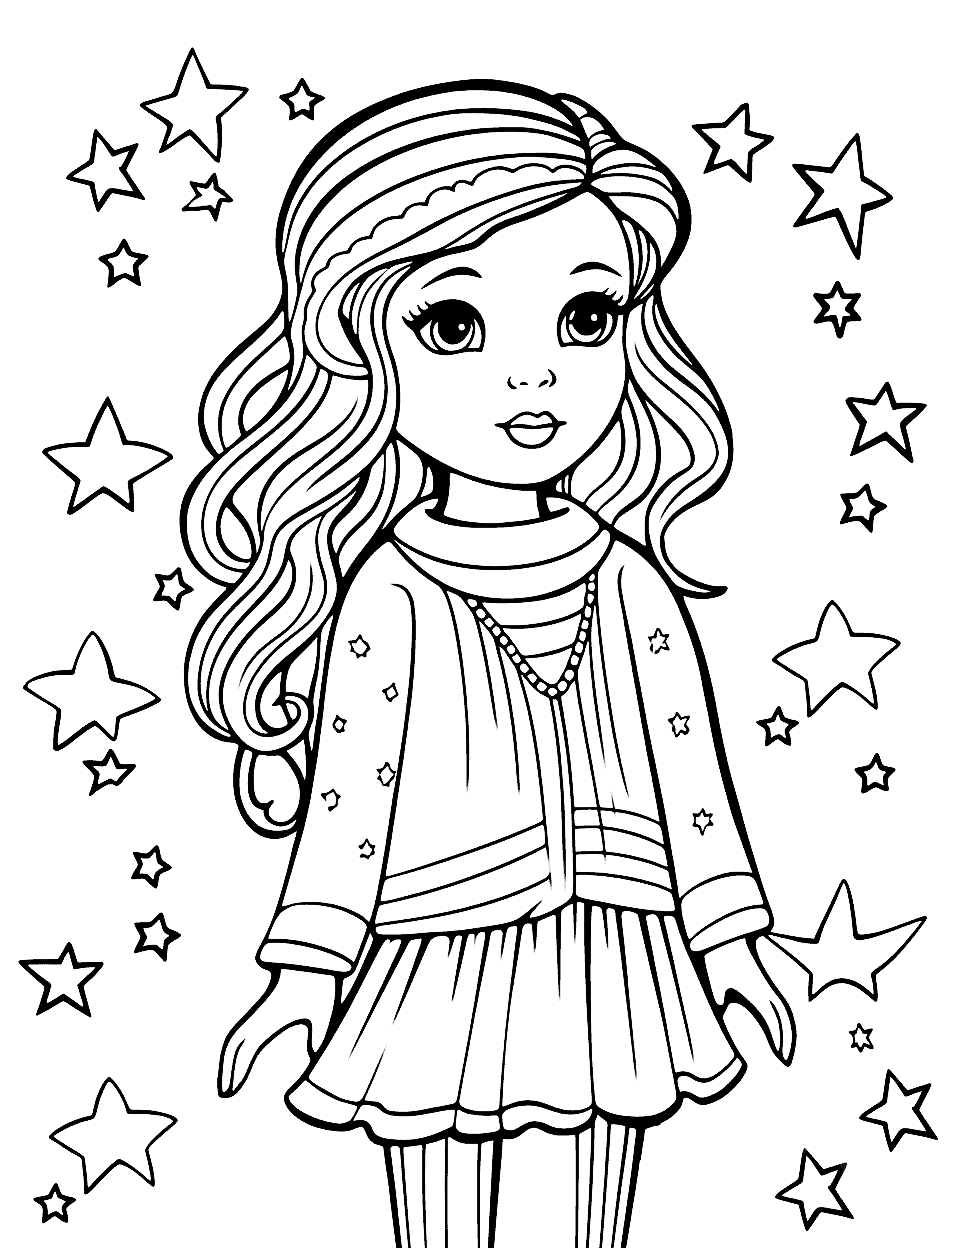 Galaxy Fashion Star Adult Coloring Page - A girl in a trendy outfit inspired by galaxies and stars.